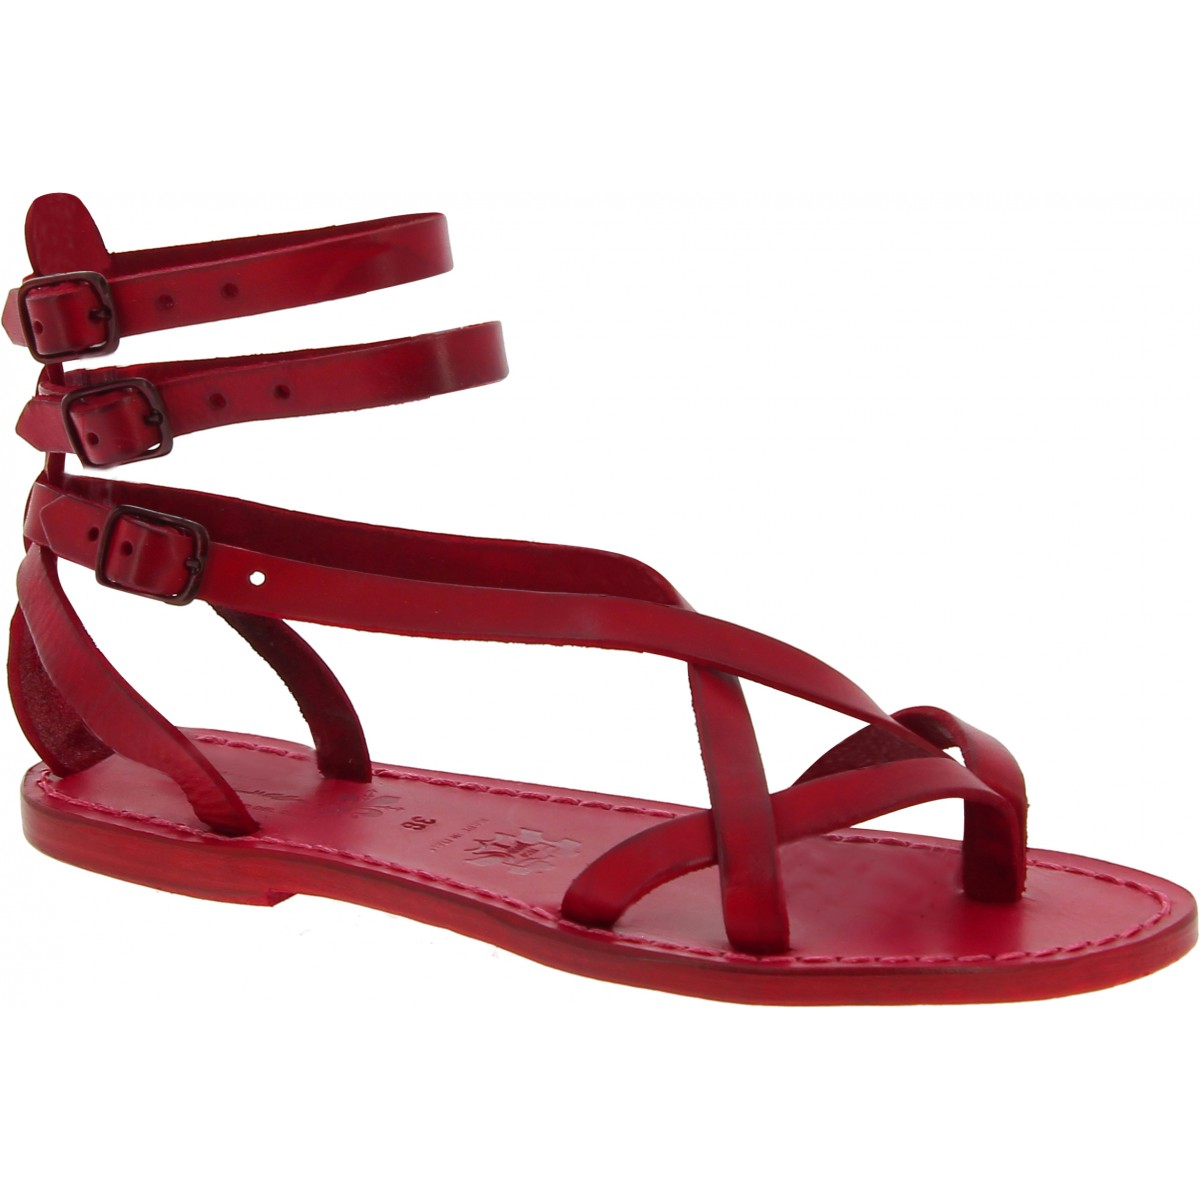 Women's strappy red leather sandals Handmade in Italy | The leather ...